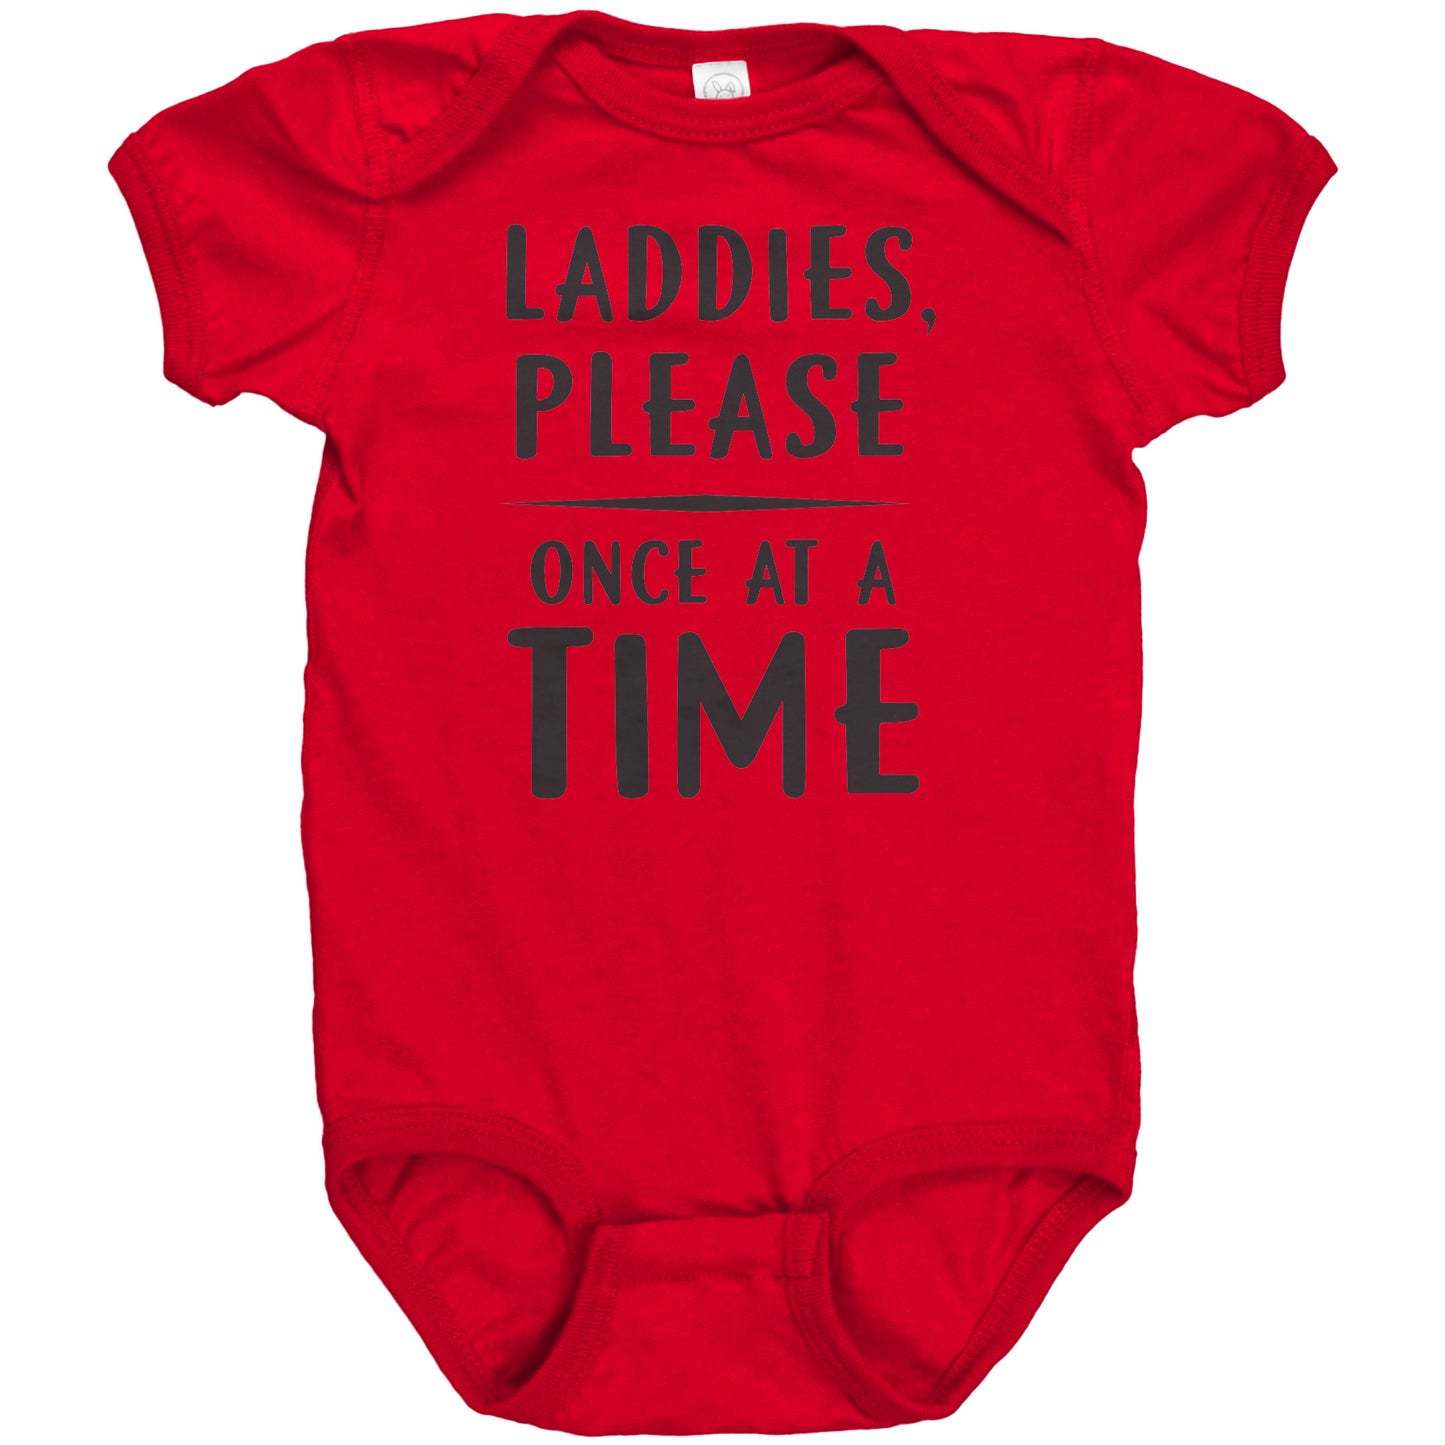 Once At A Time - Infant Bodysuits